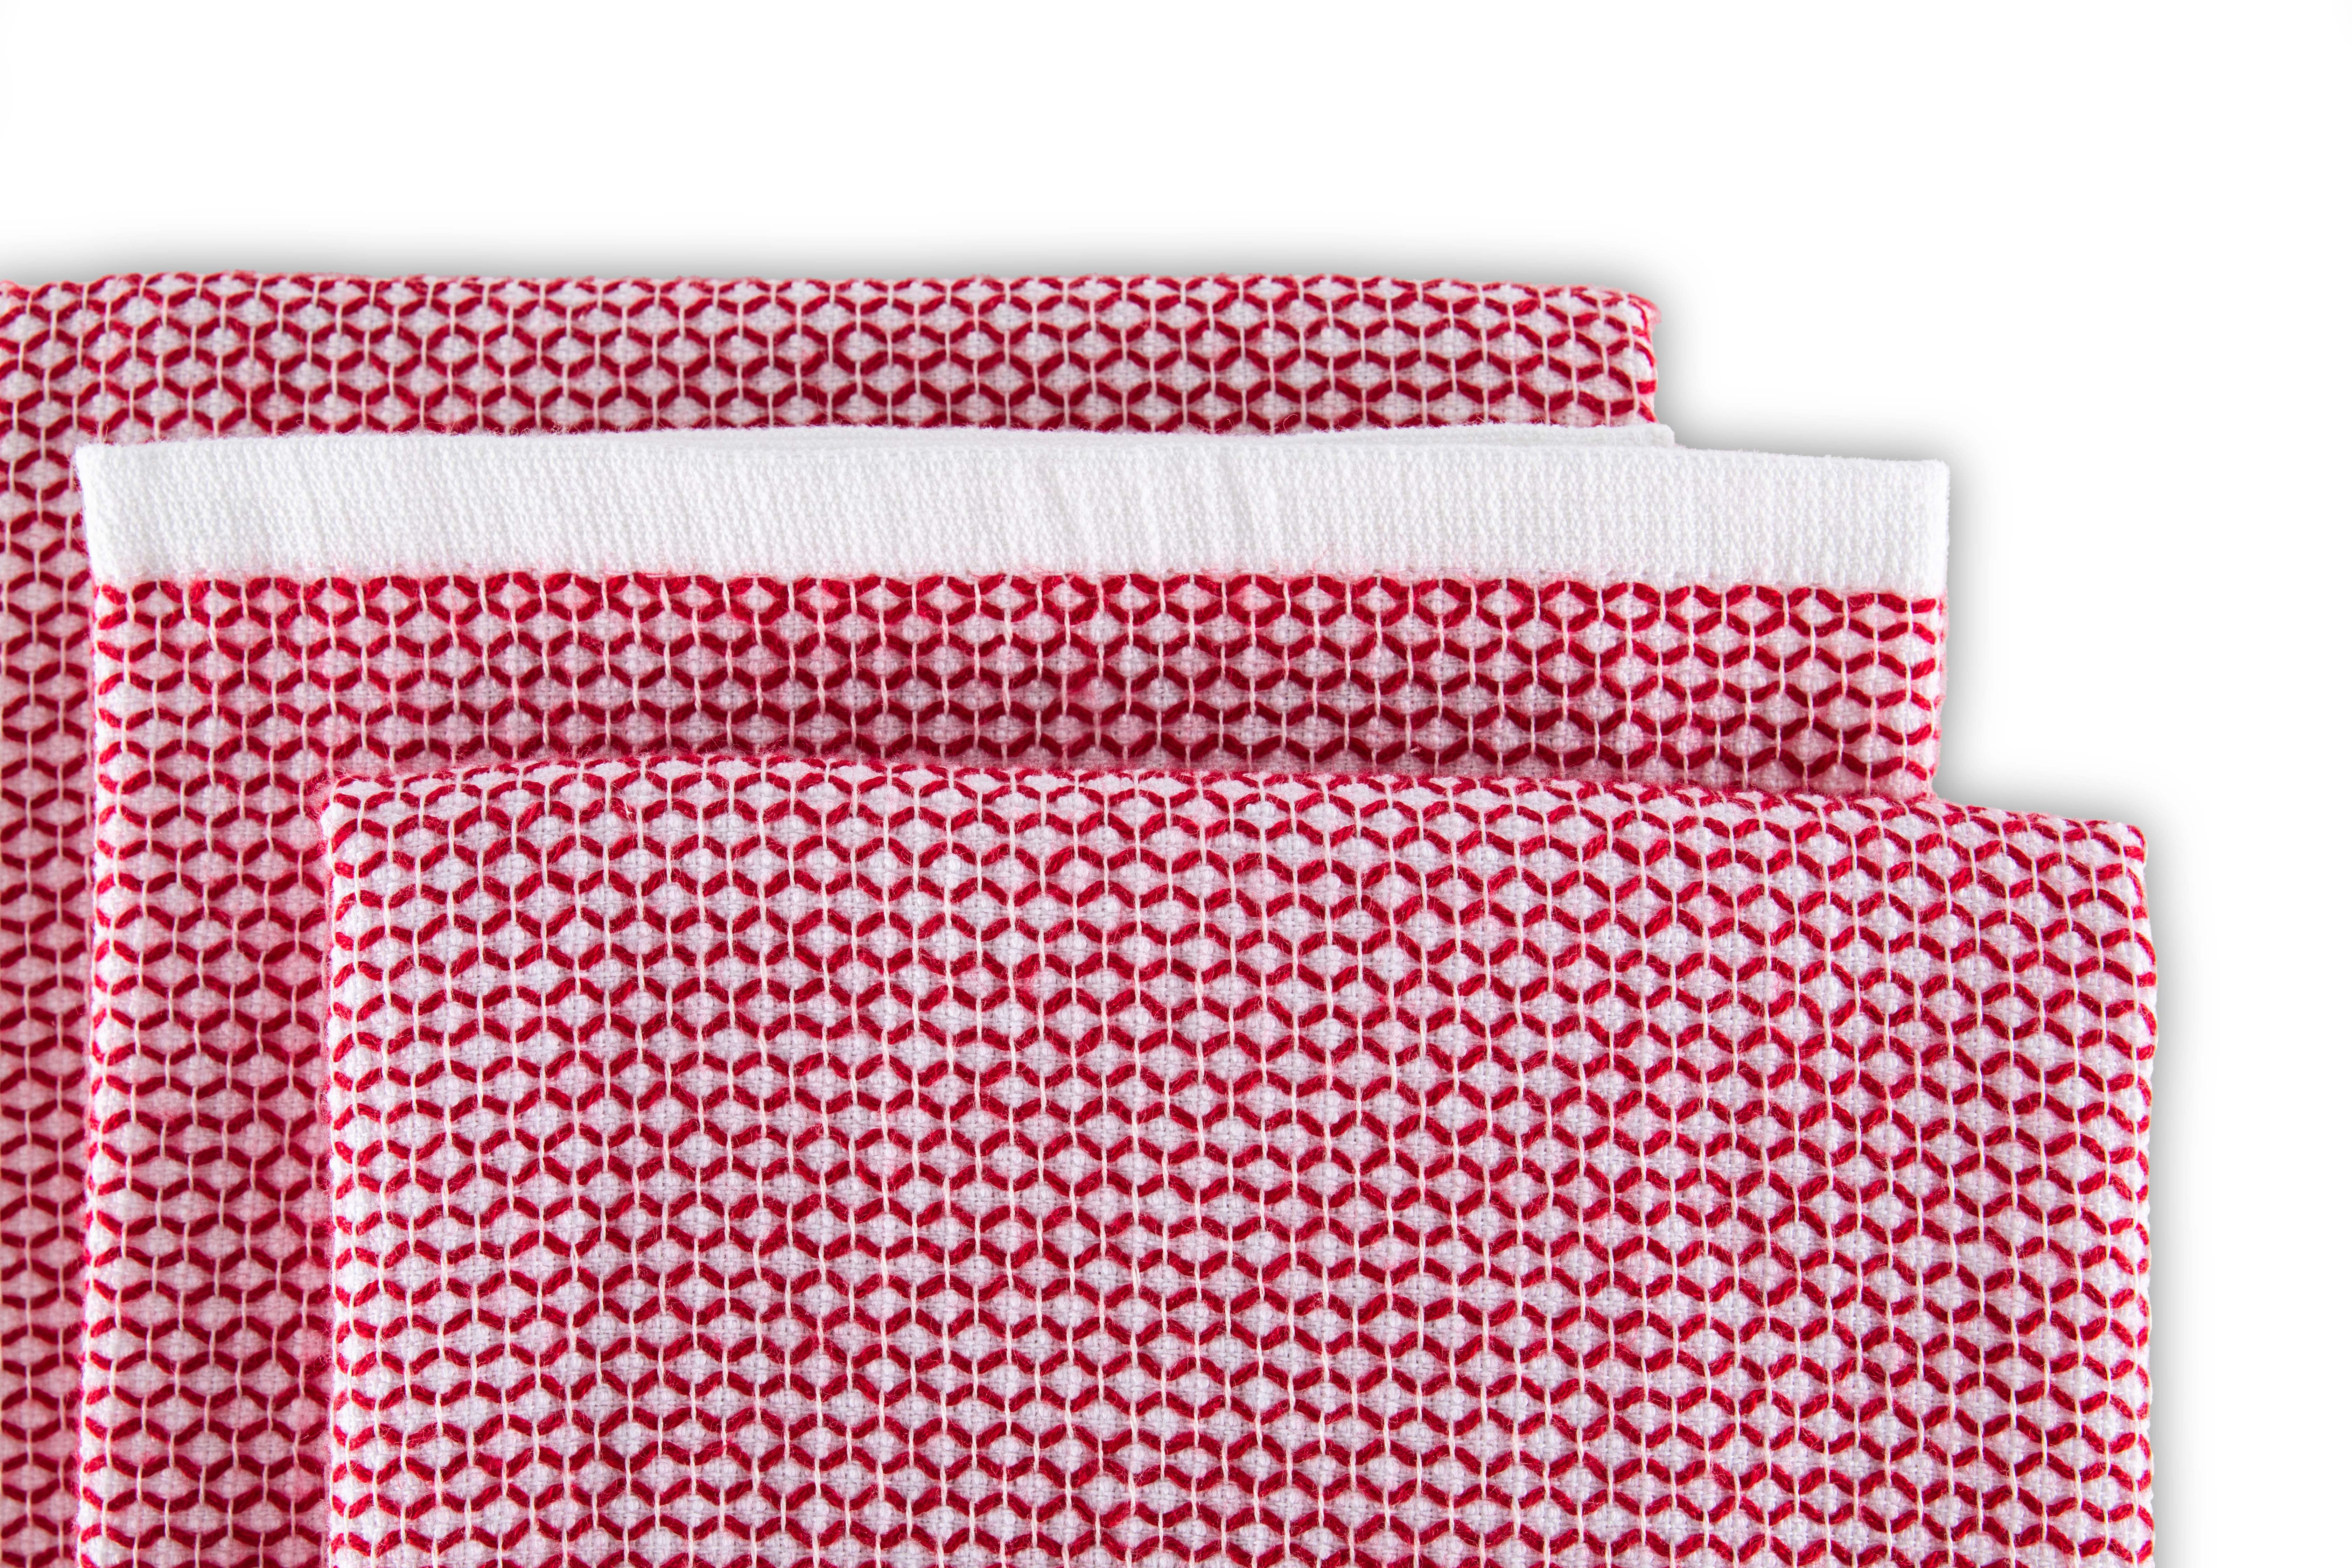 Kitchentowels Culinary Duo Leno 50x76 red, set3